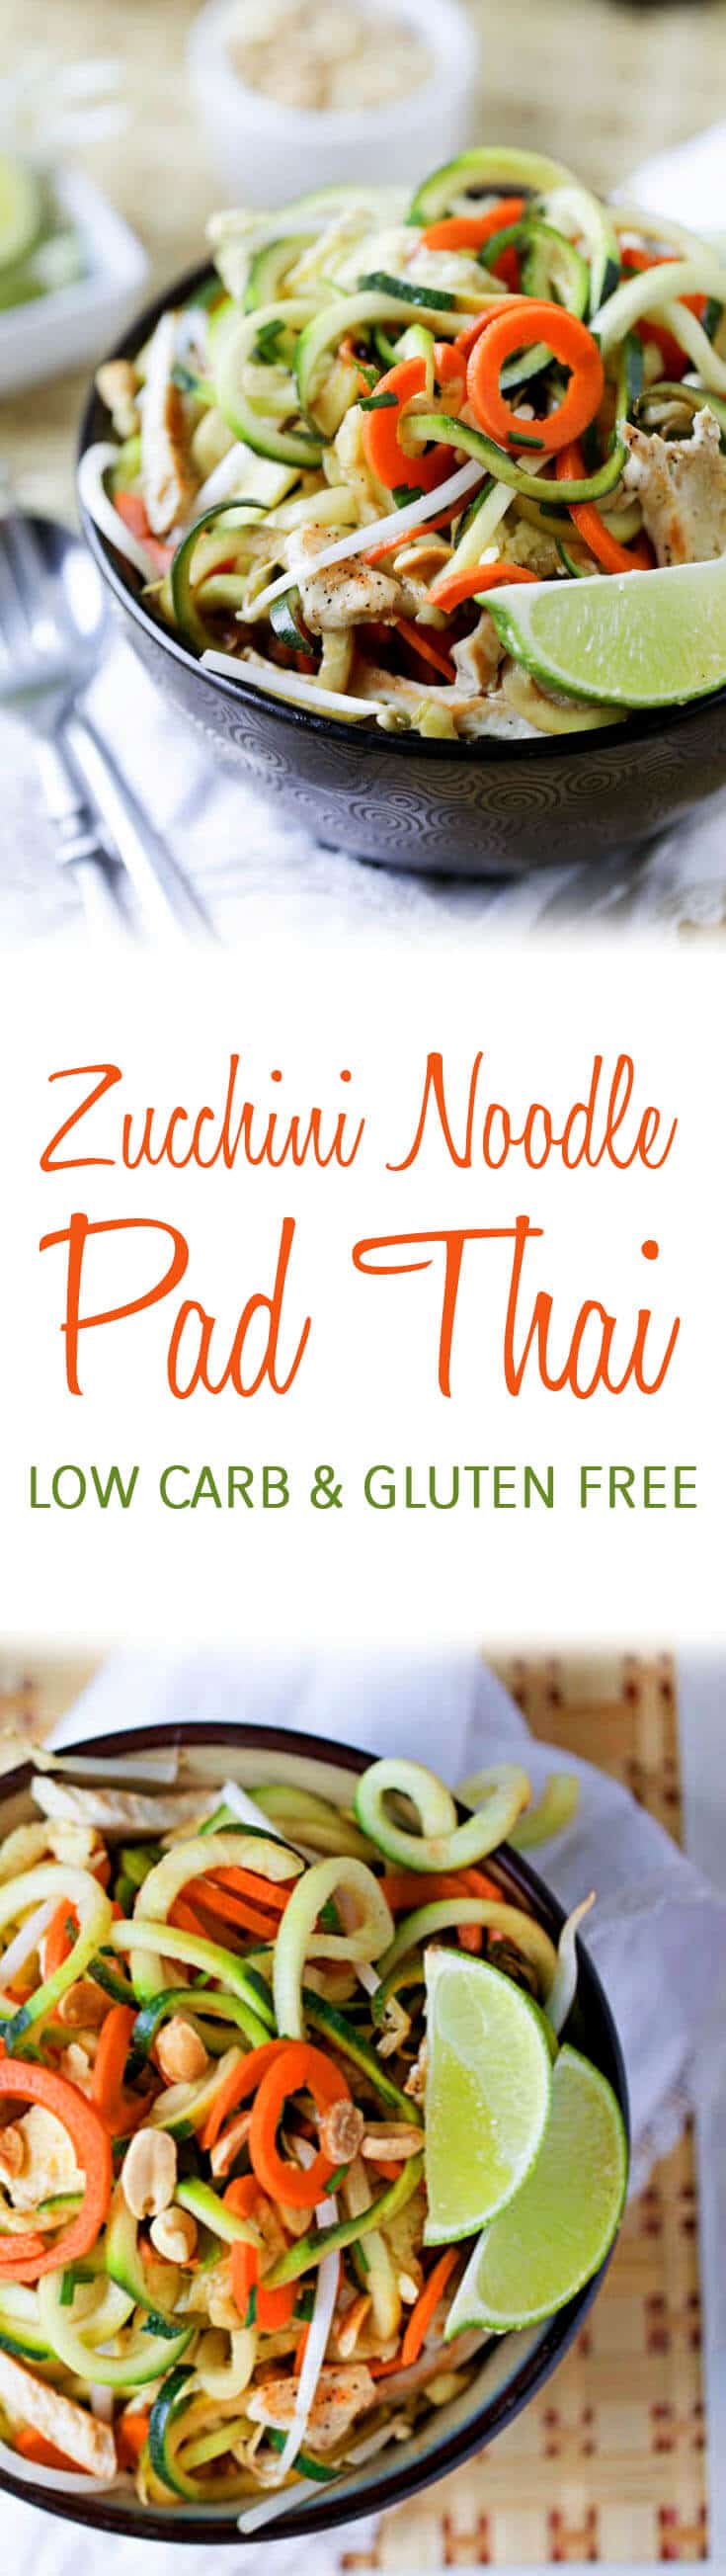 Love Pad Thai, but not the fat and carbs that come with it?! The you should definitely try my Gluten Free Zucchini Noodle Pad Thai.